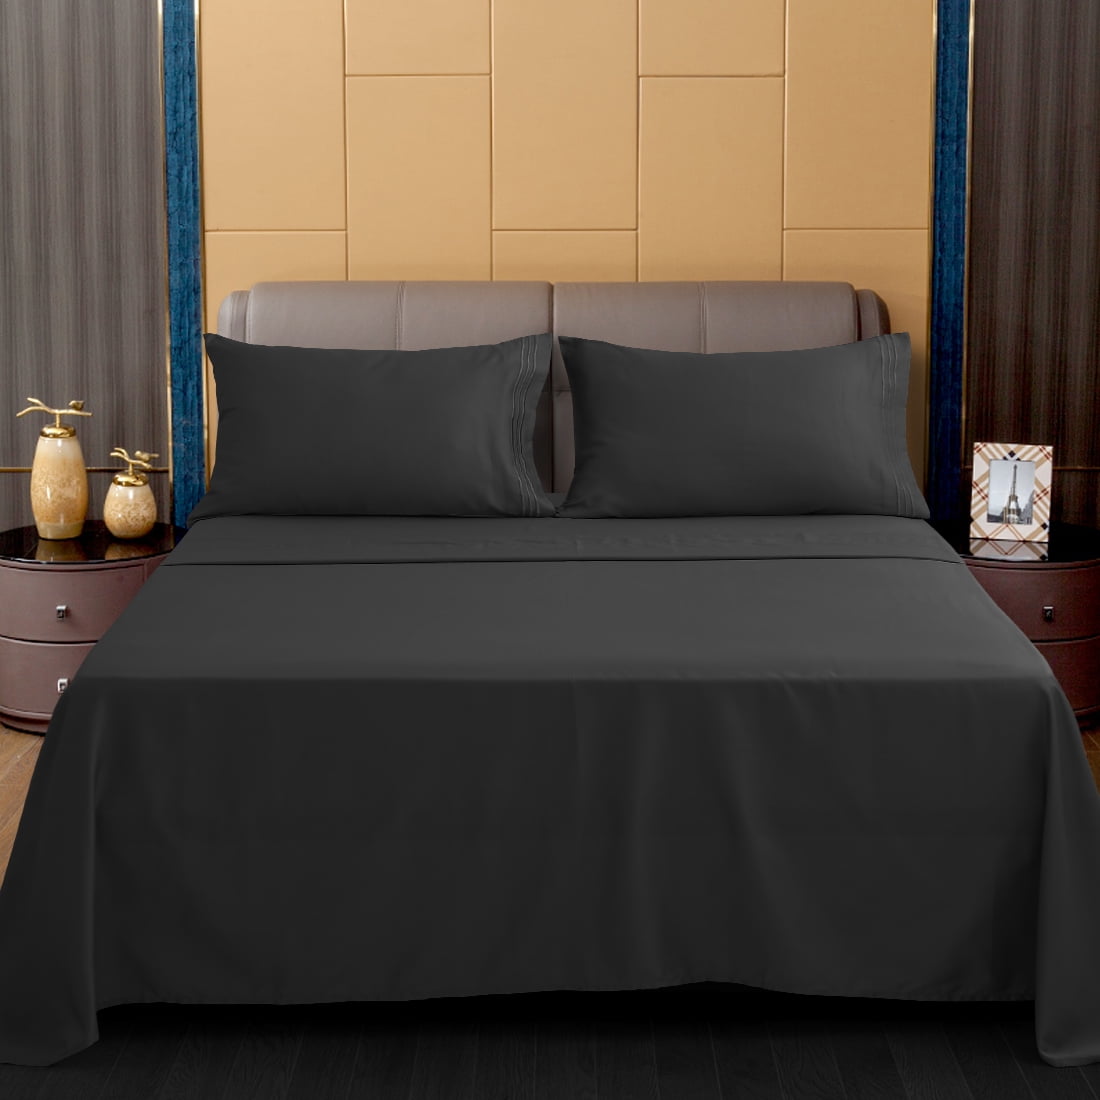 Details about   Extra Deep Pocket 4 PCs Sheet Set 1000TC Egyptian Cotton Chocolate Solid US Size 